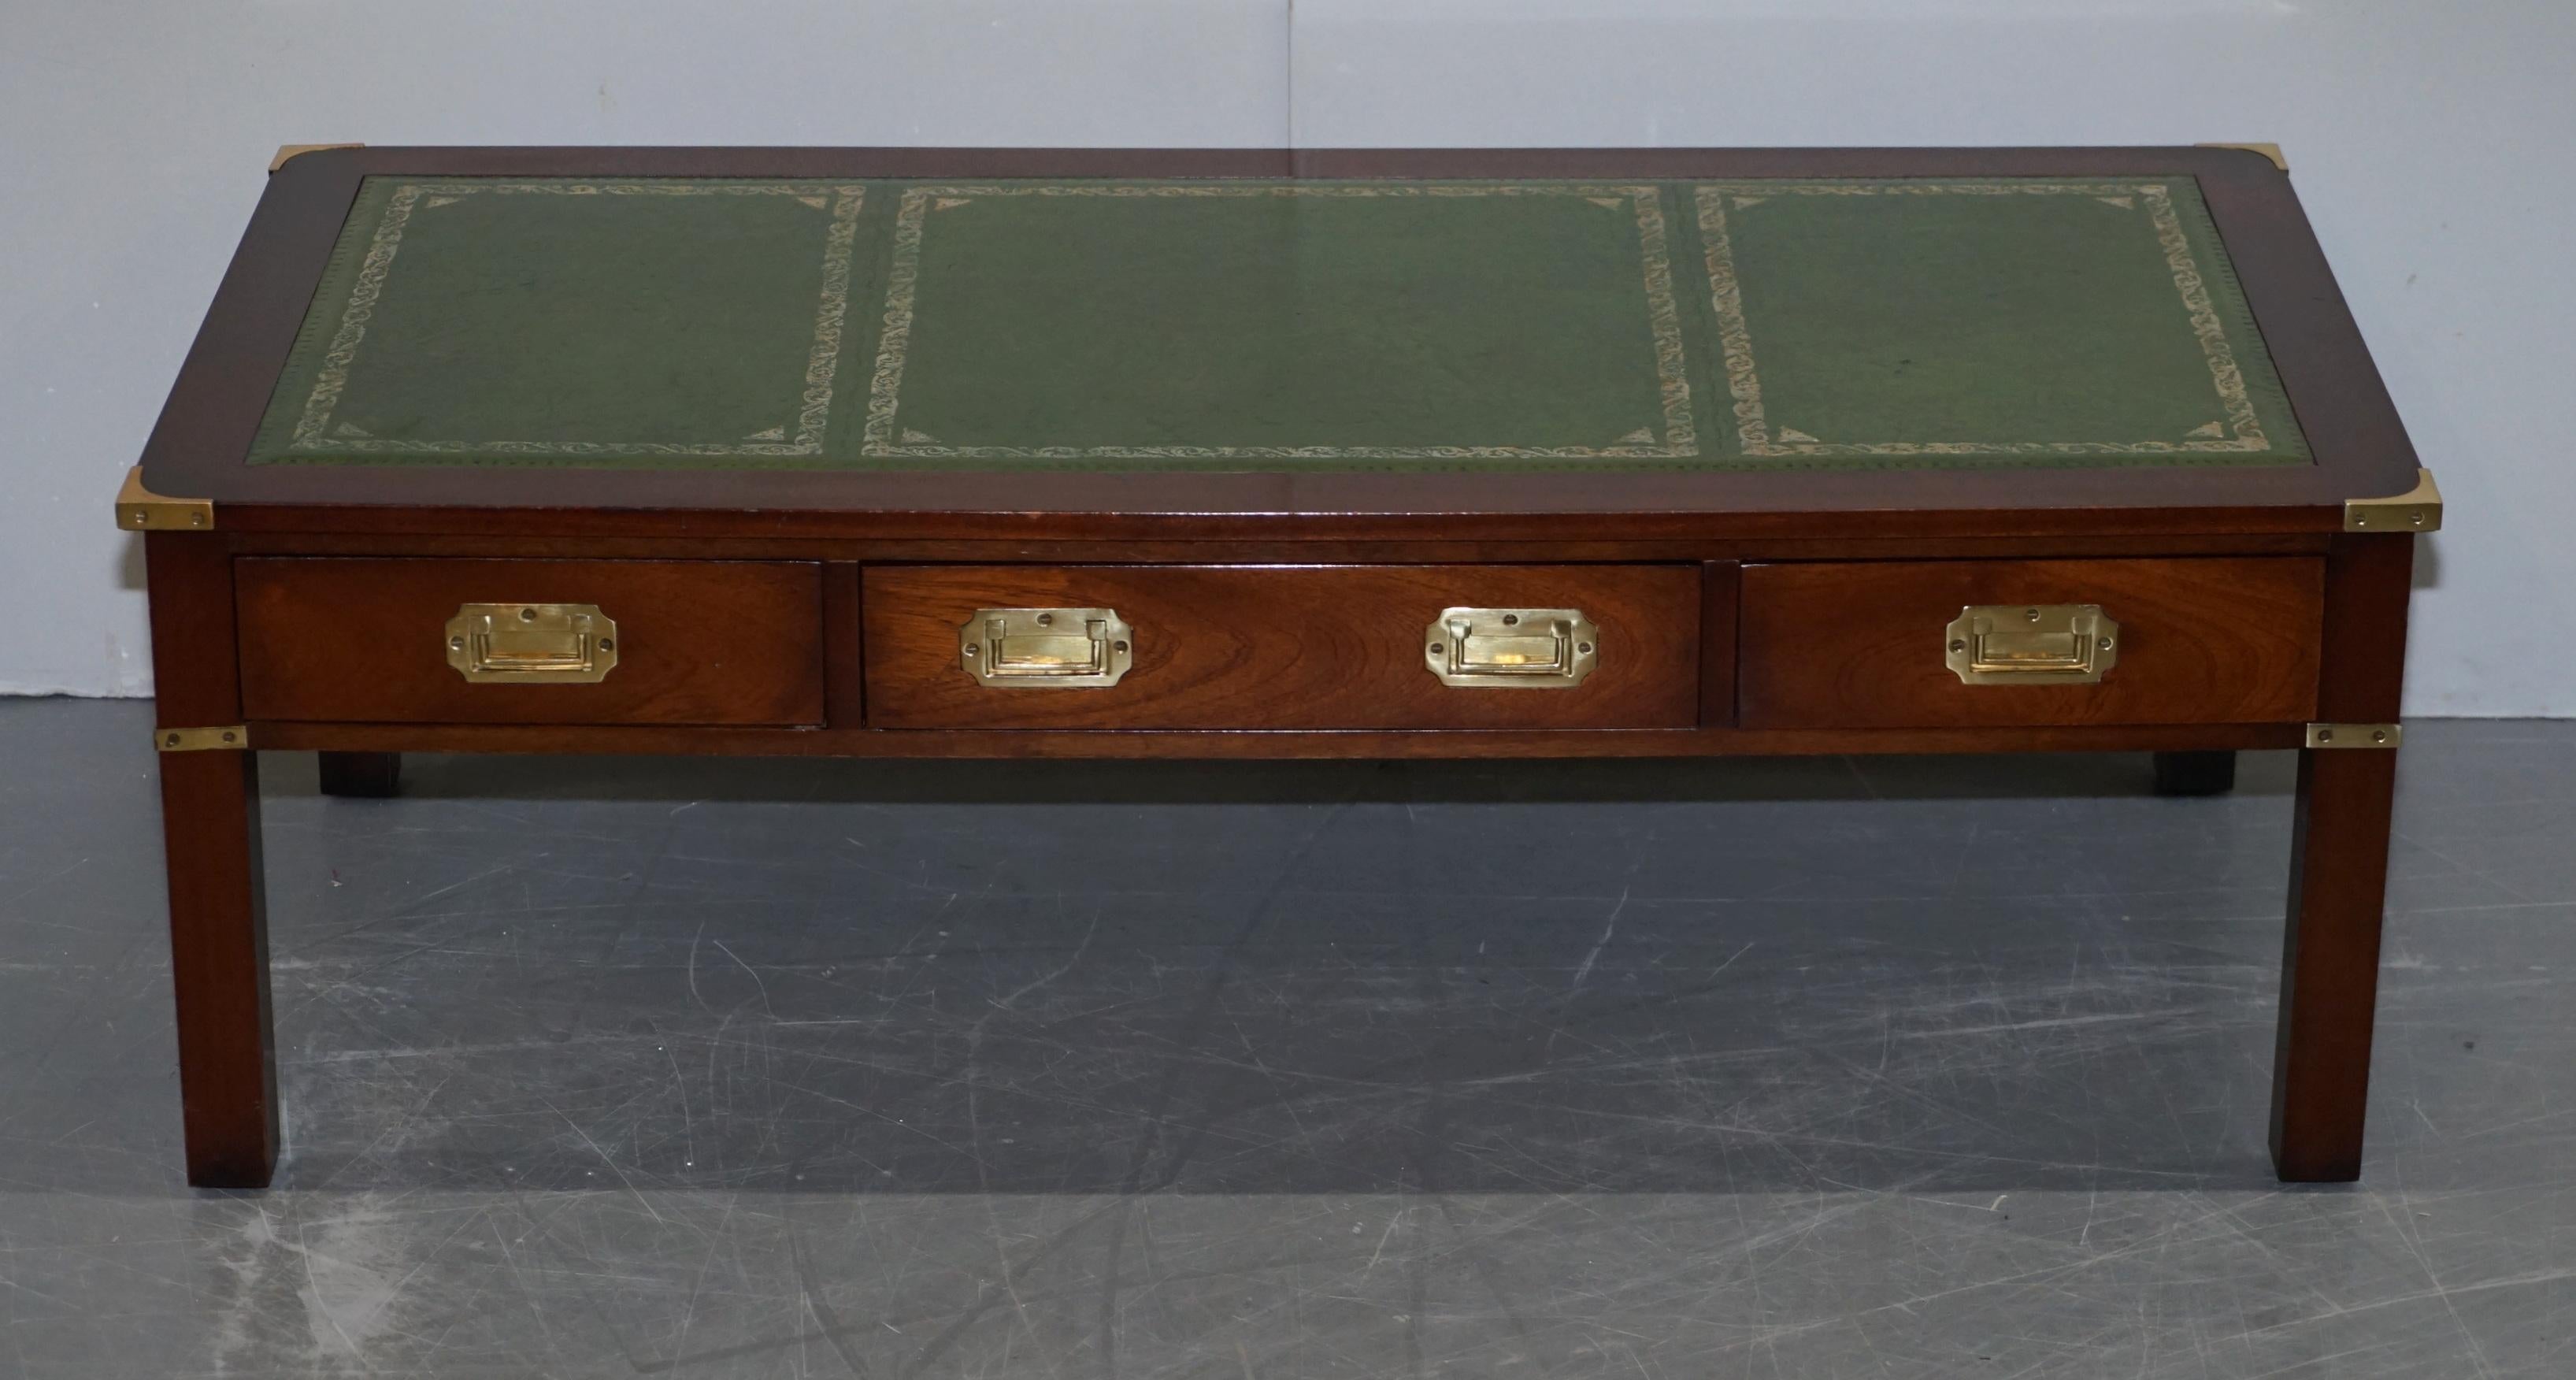 We are delighted to this vintage collectable Harrods London Military Campaign three drawer coffee table made by Kennedy with green leather top

This piece was sold through Harrods circa 20-30 years ago, it was made by Kennedy who were Harrods